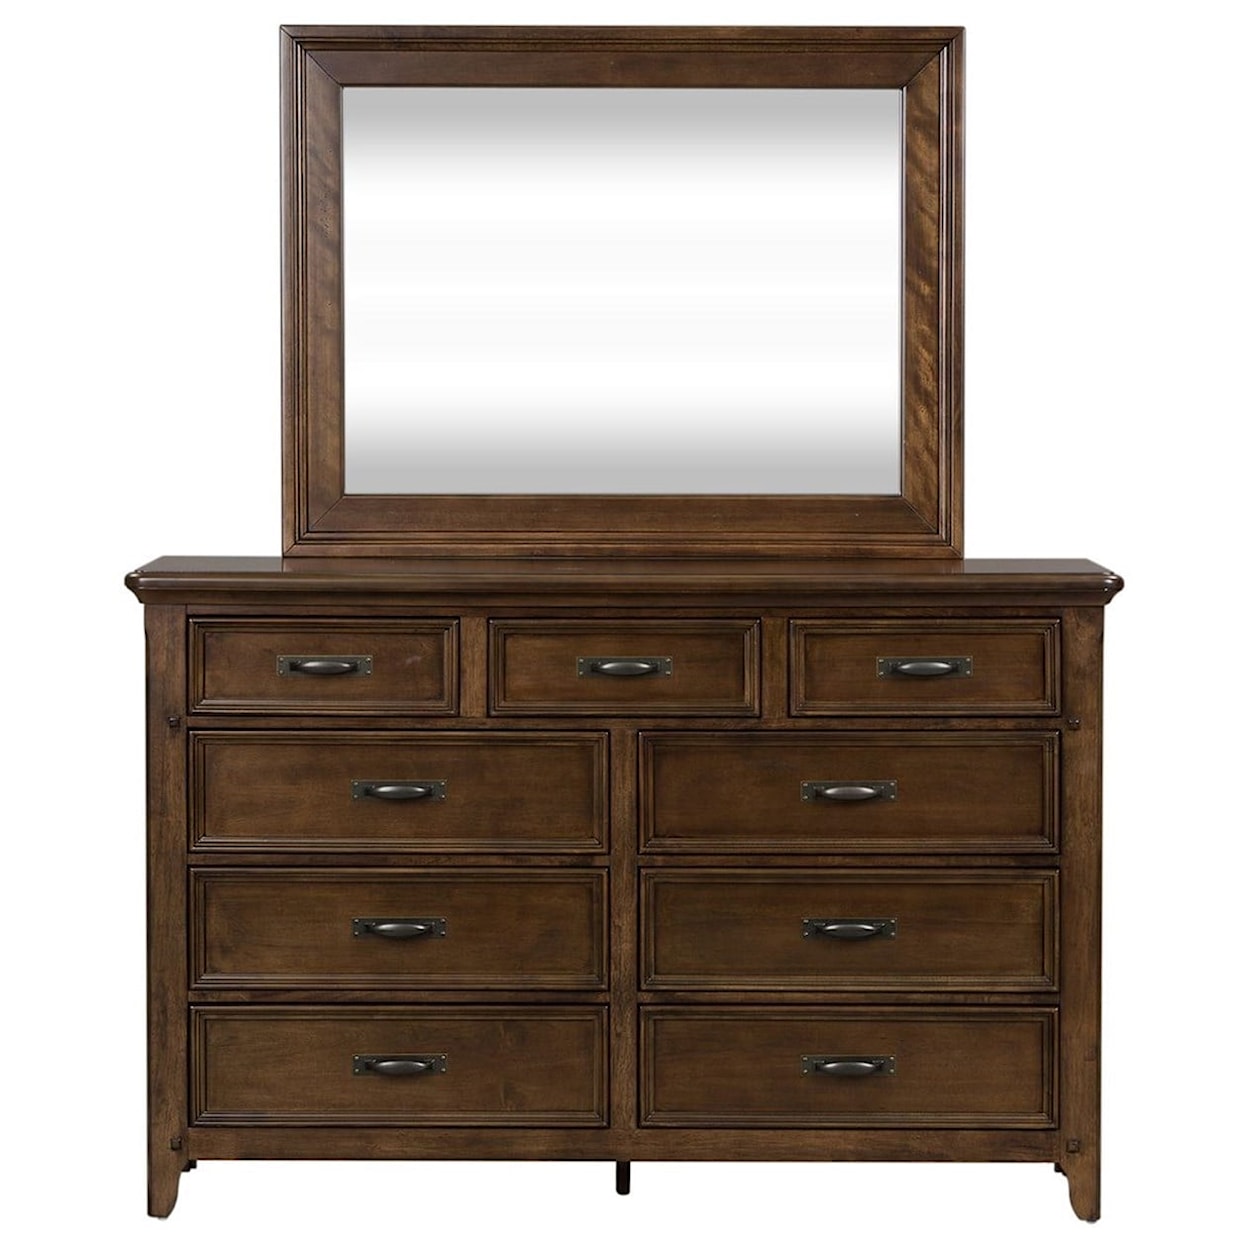 Libby Saddlebrook Queen Panel Bedroom Group